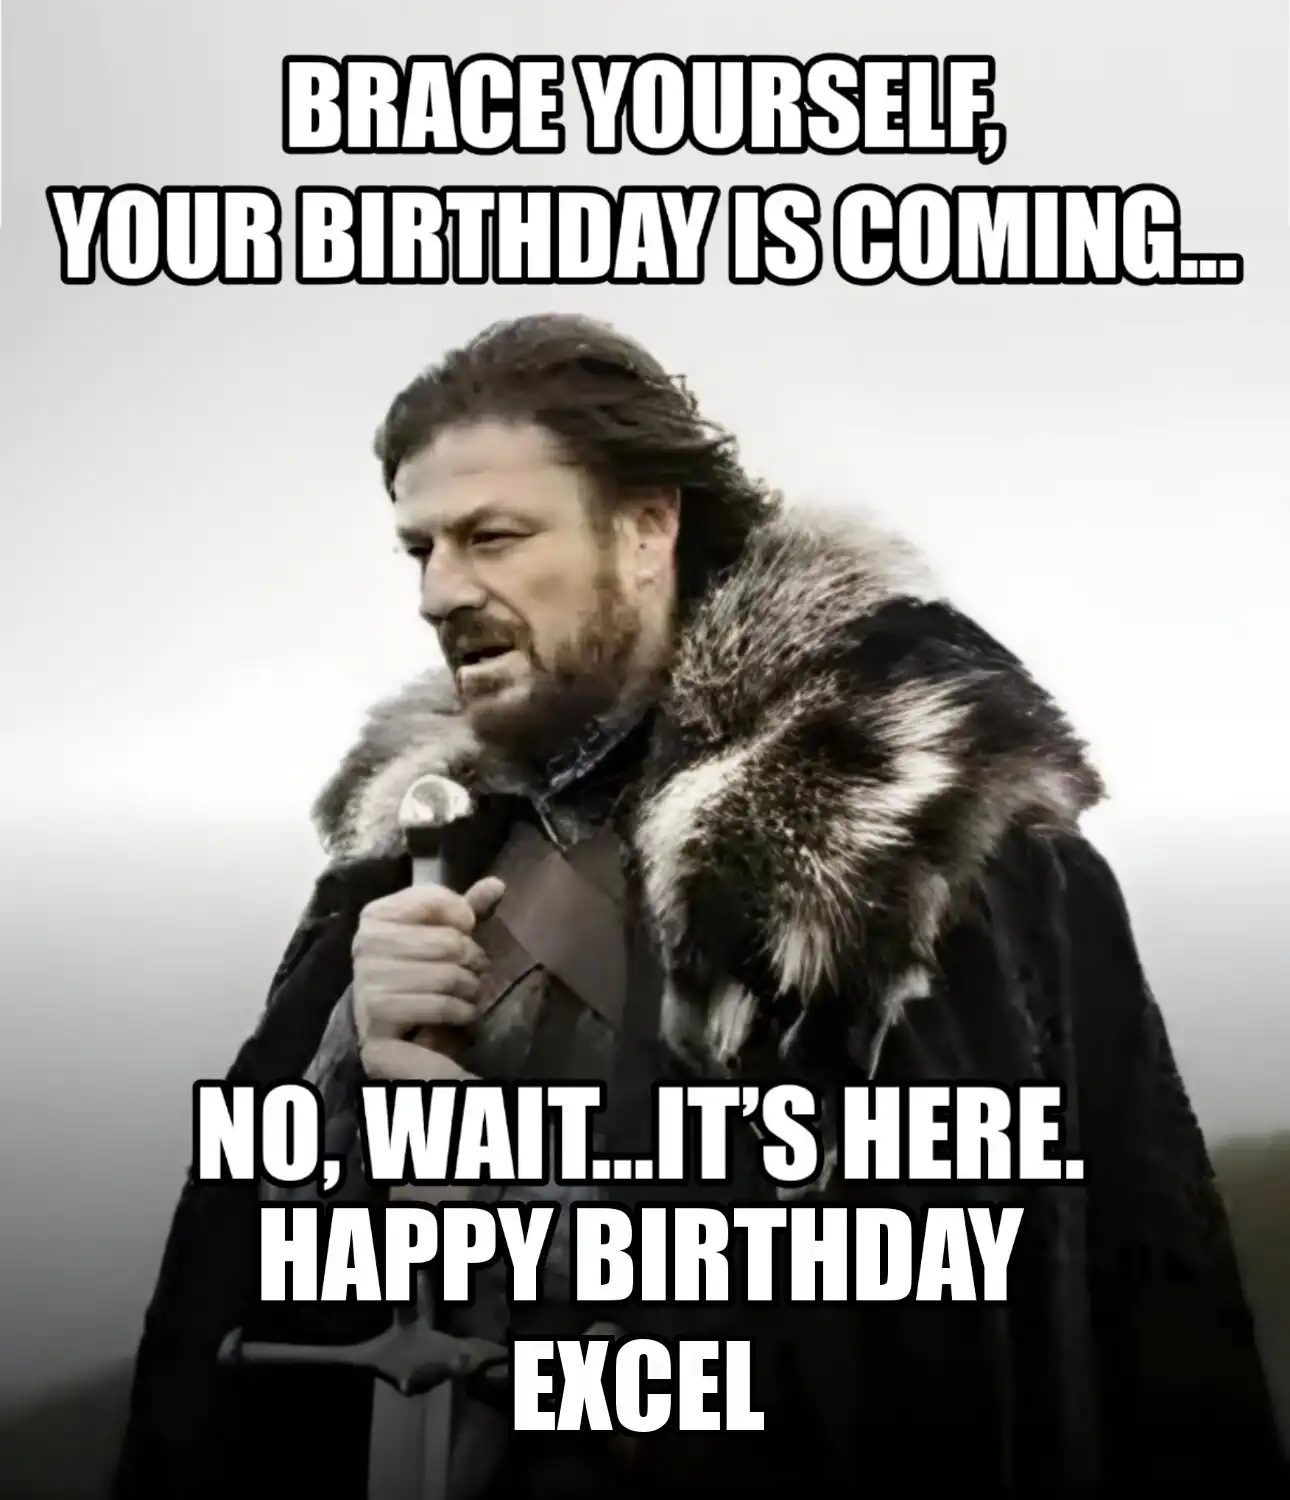 Happy Birthday Excel Brace Yourself Your Birthday Is Coming Meme